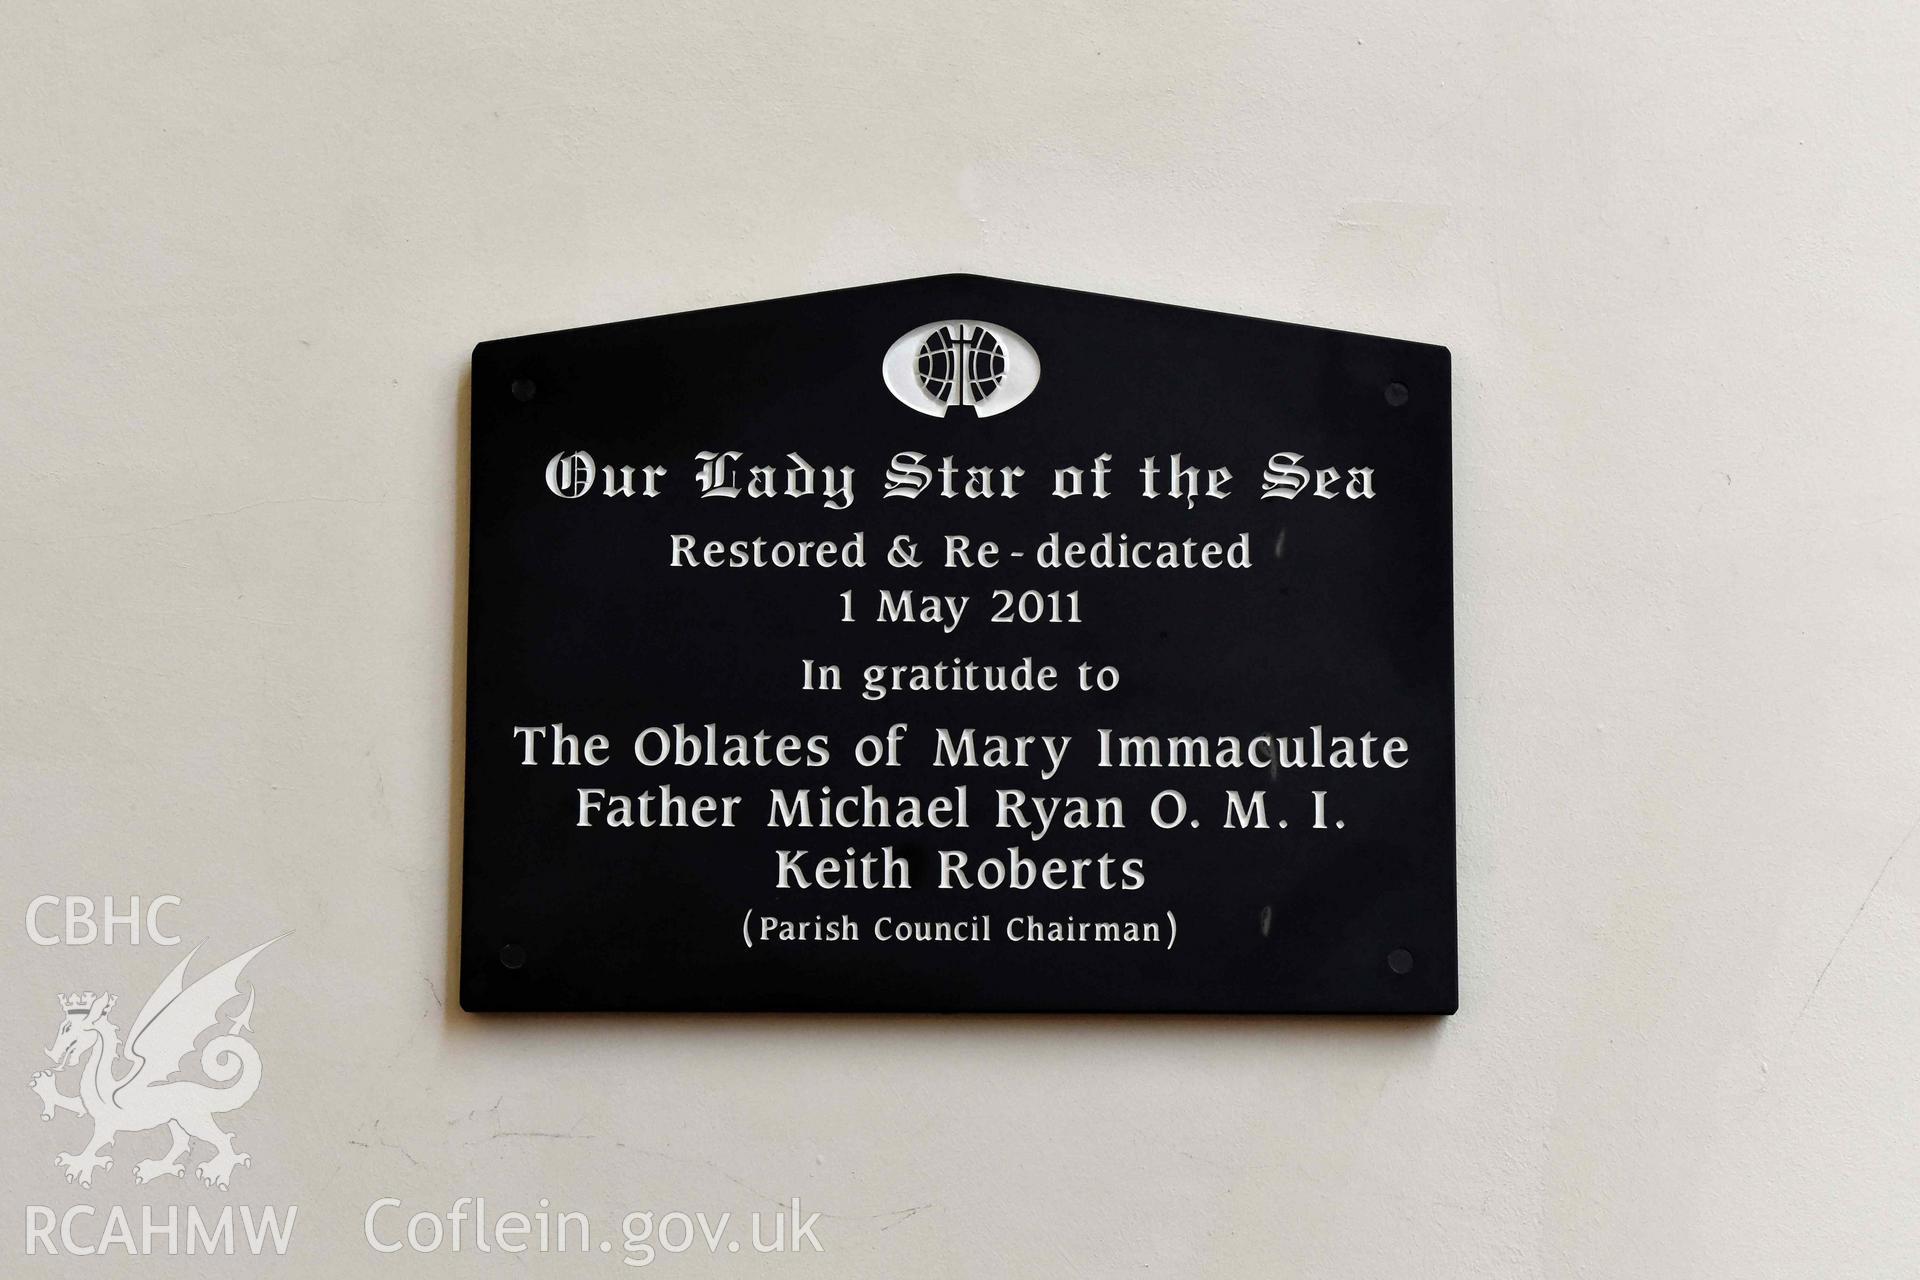 Our Lady Star Of The Sea and St Winefride; interior detail of memorial plaque Taken by Susan Fielding.